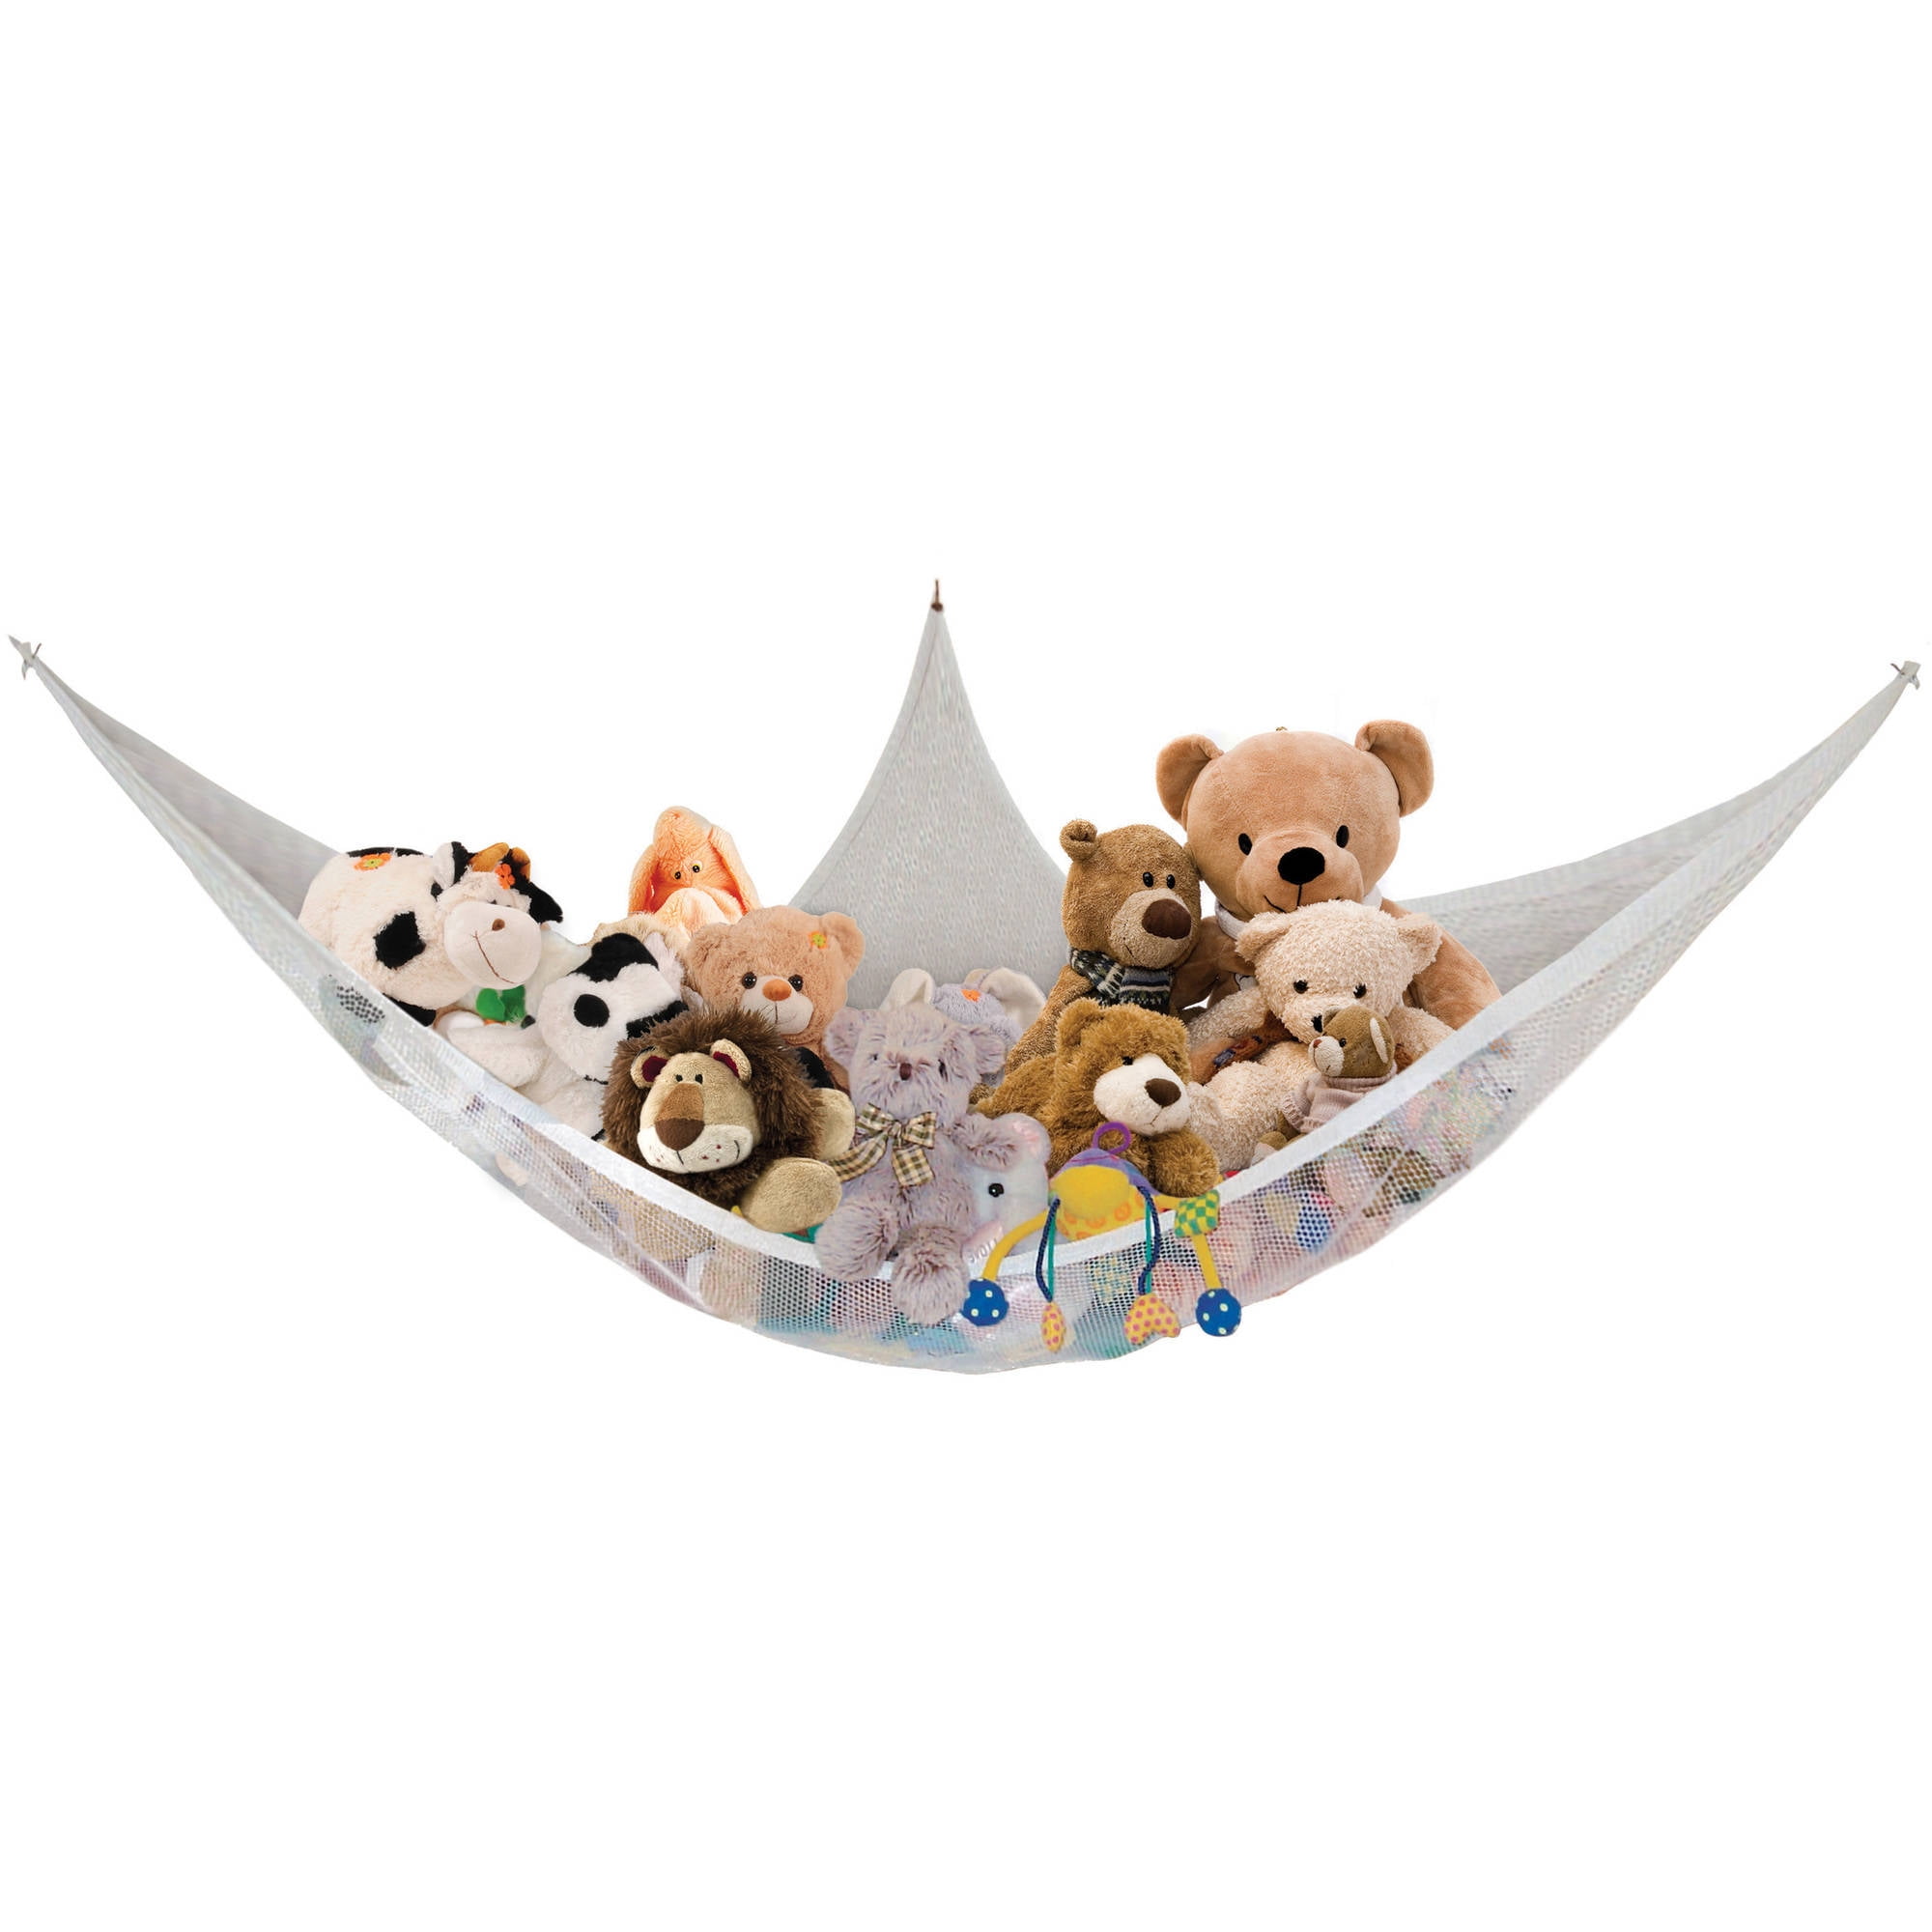 Details about   Lillys Love Stuffed Animal Storage Hammock Large Pack 2 "STUFFIE PARTY HAMM... 